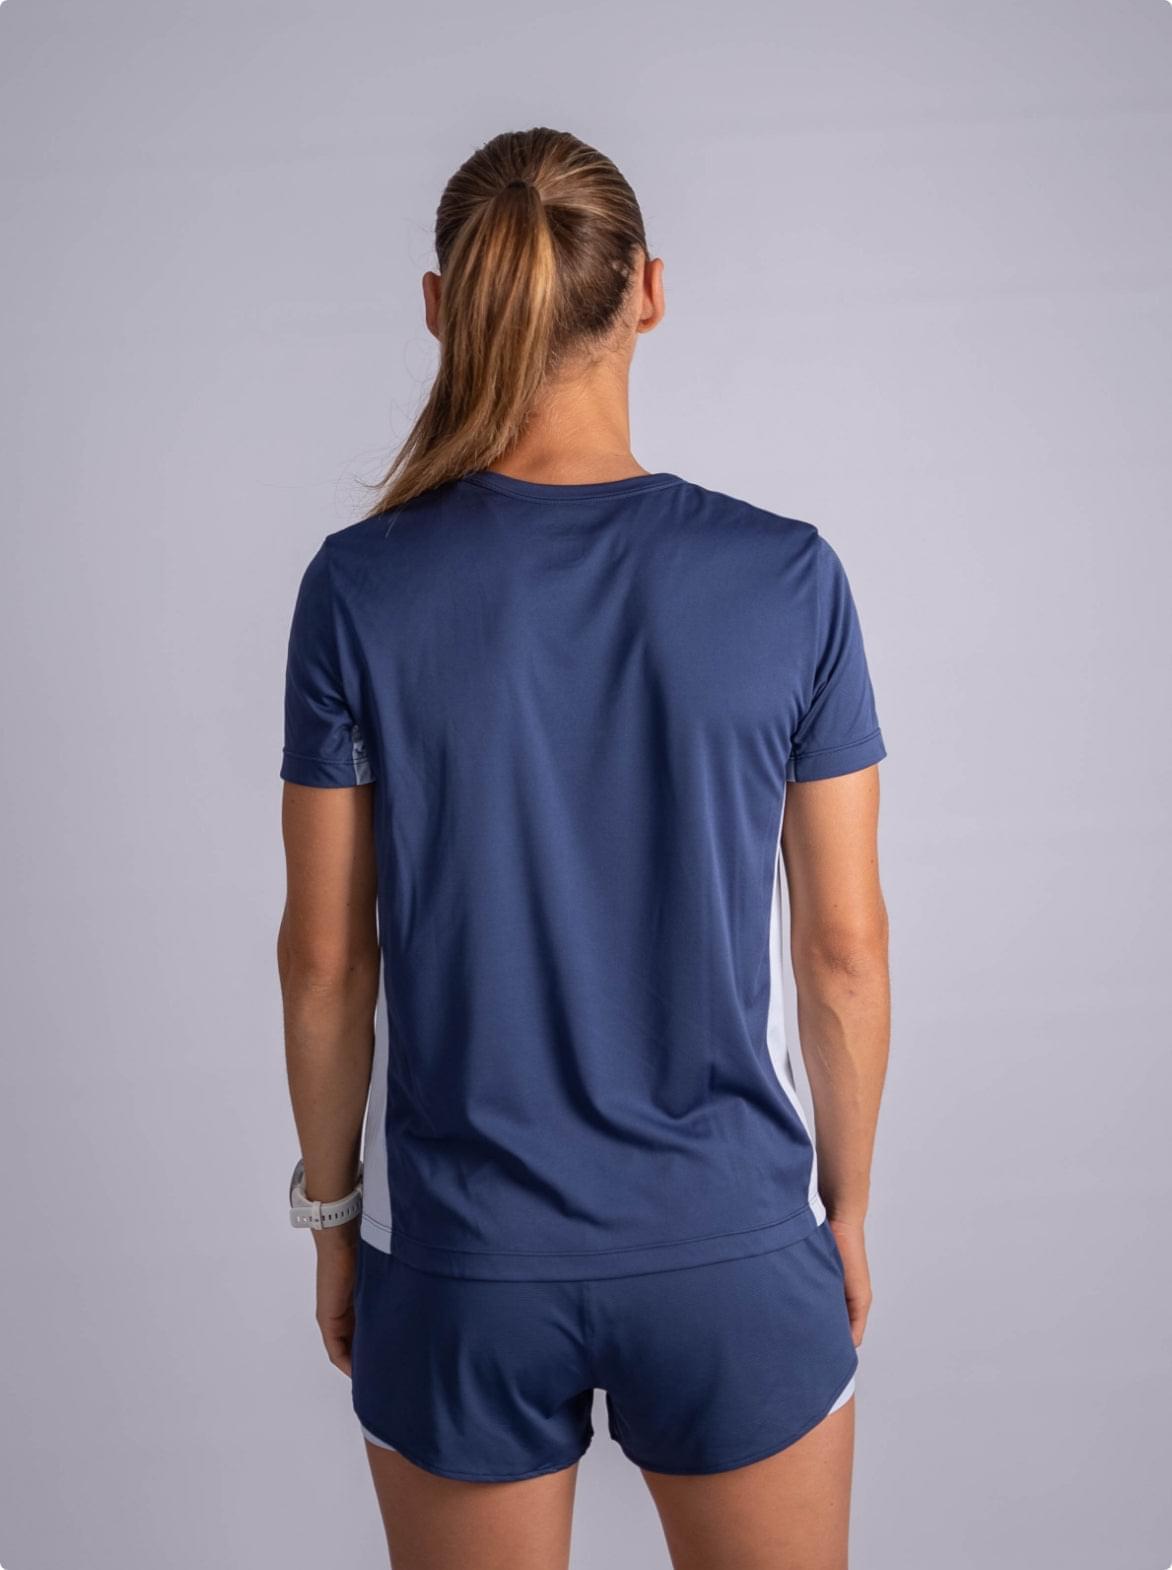 Women's Sustainable Running T-Shirt Made in France — TOULON